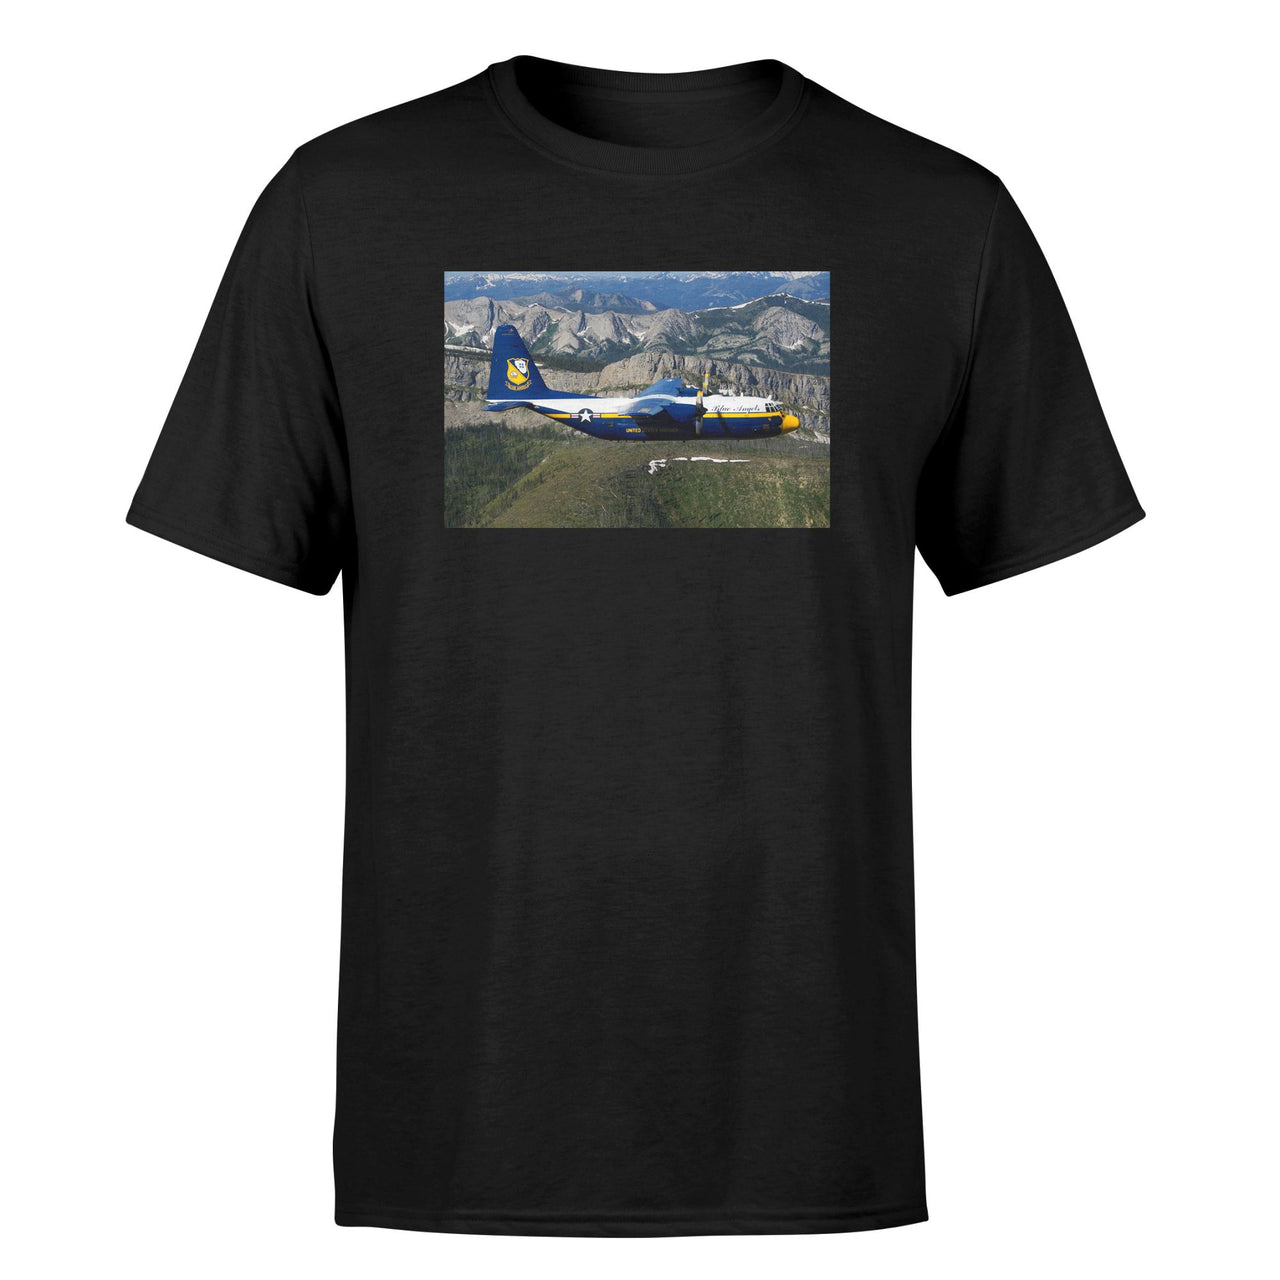 Amazing View with Blue Angels Aircraft Designed T-Shirts